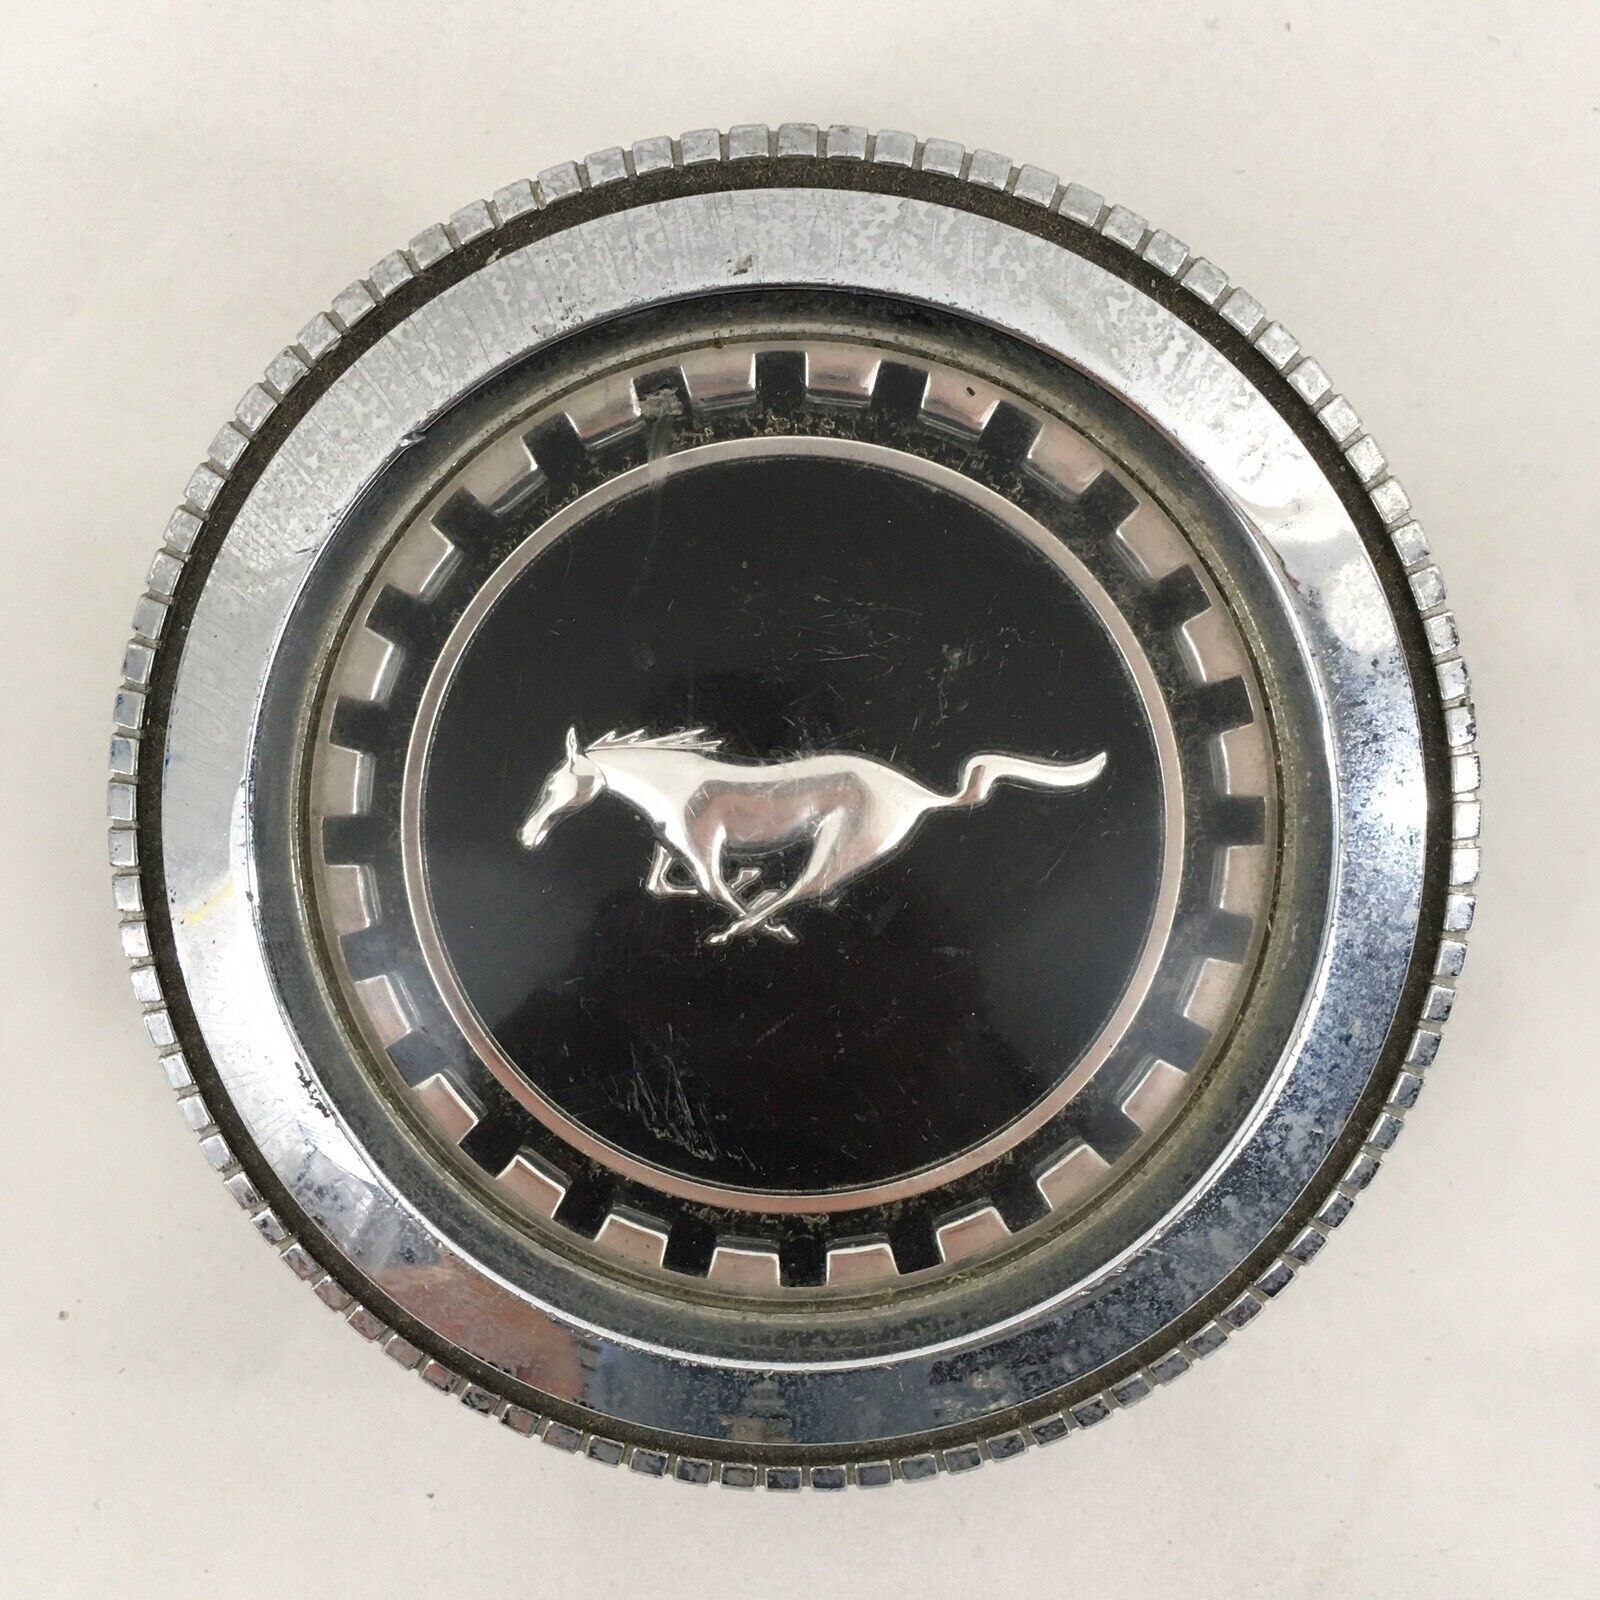 Primary image for Original Part 68 Ford Mustang Running Pony Round Vintage Gas Cap